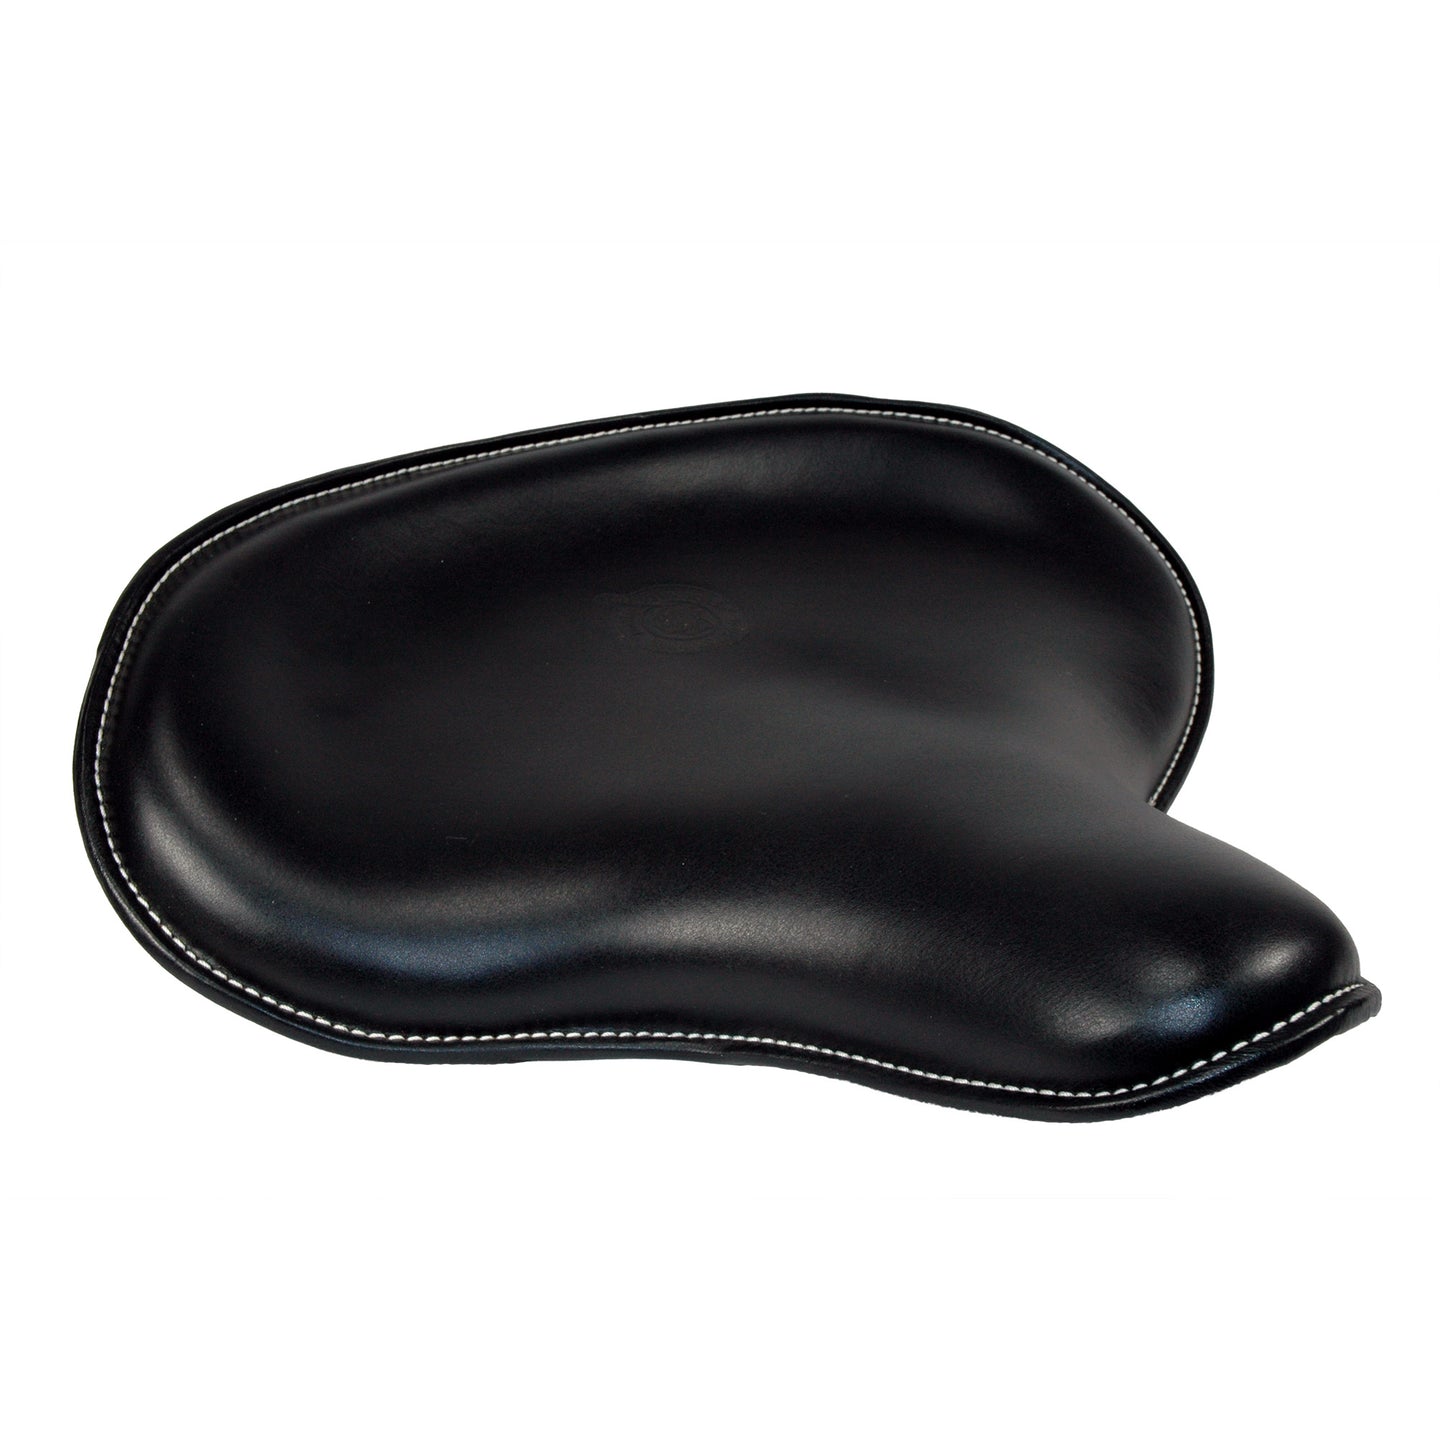 Solo Seat - Black Plain with Rolled Edge